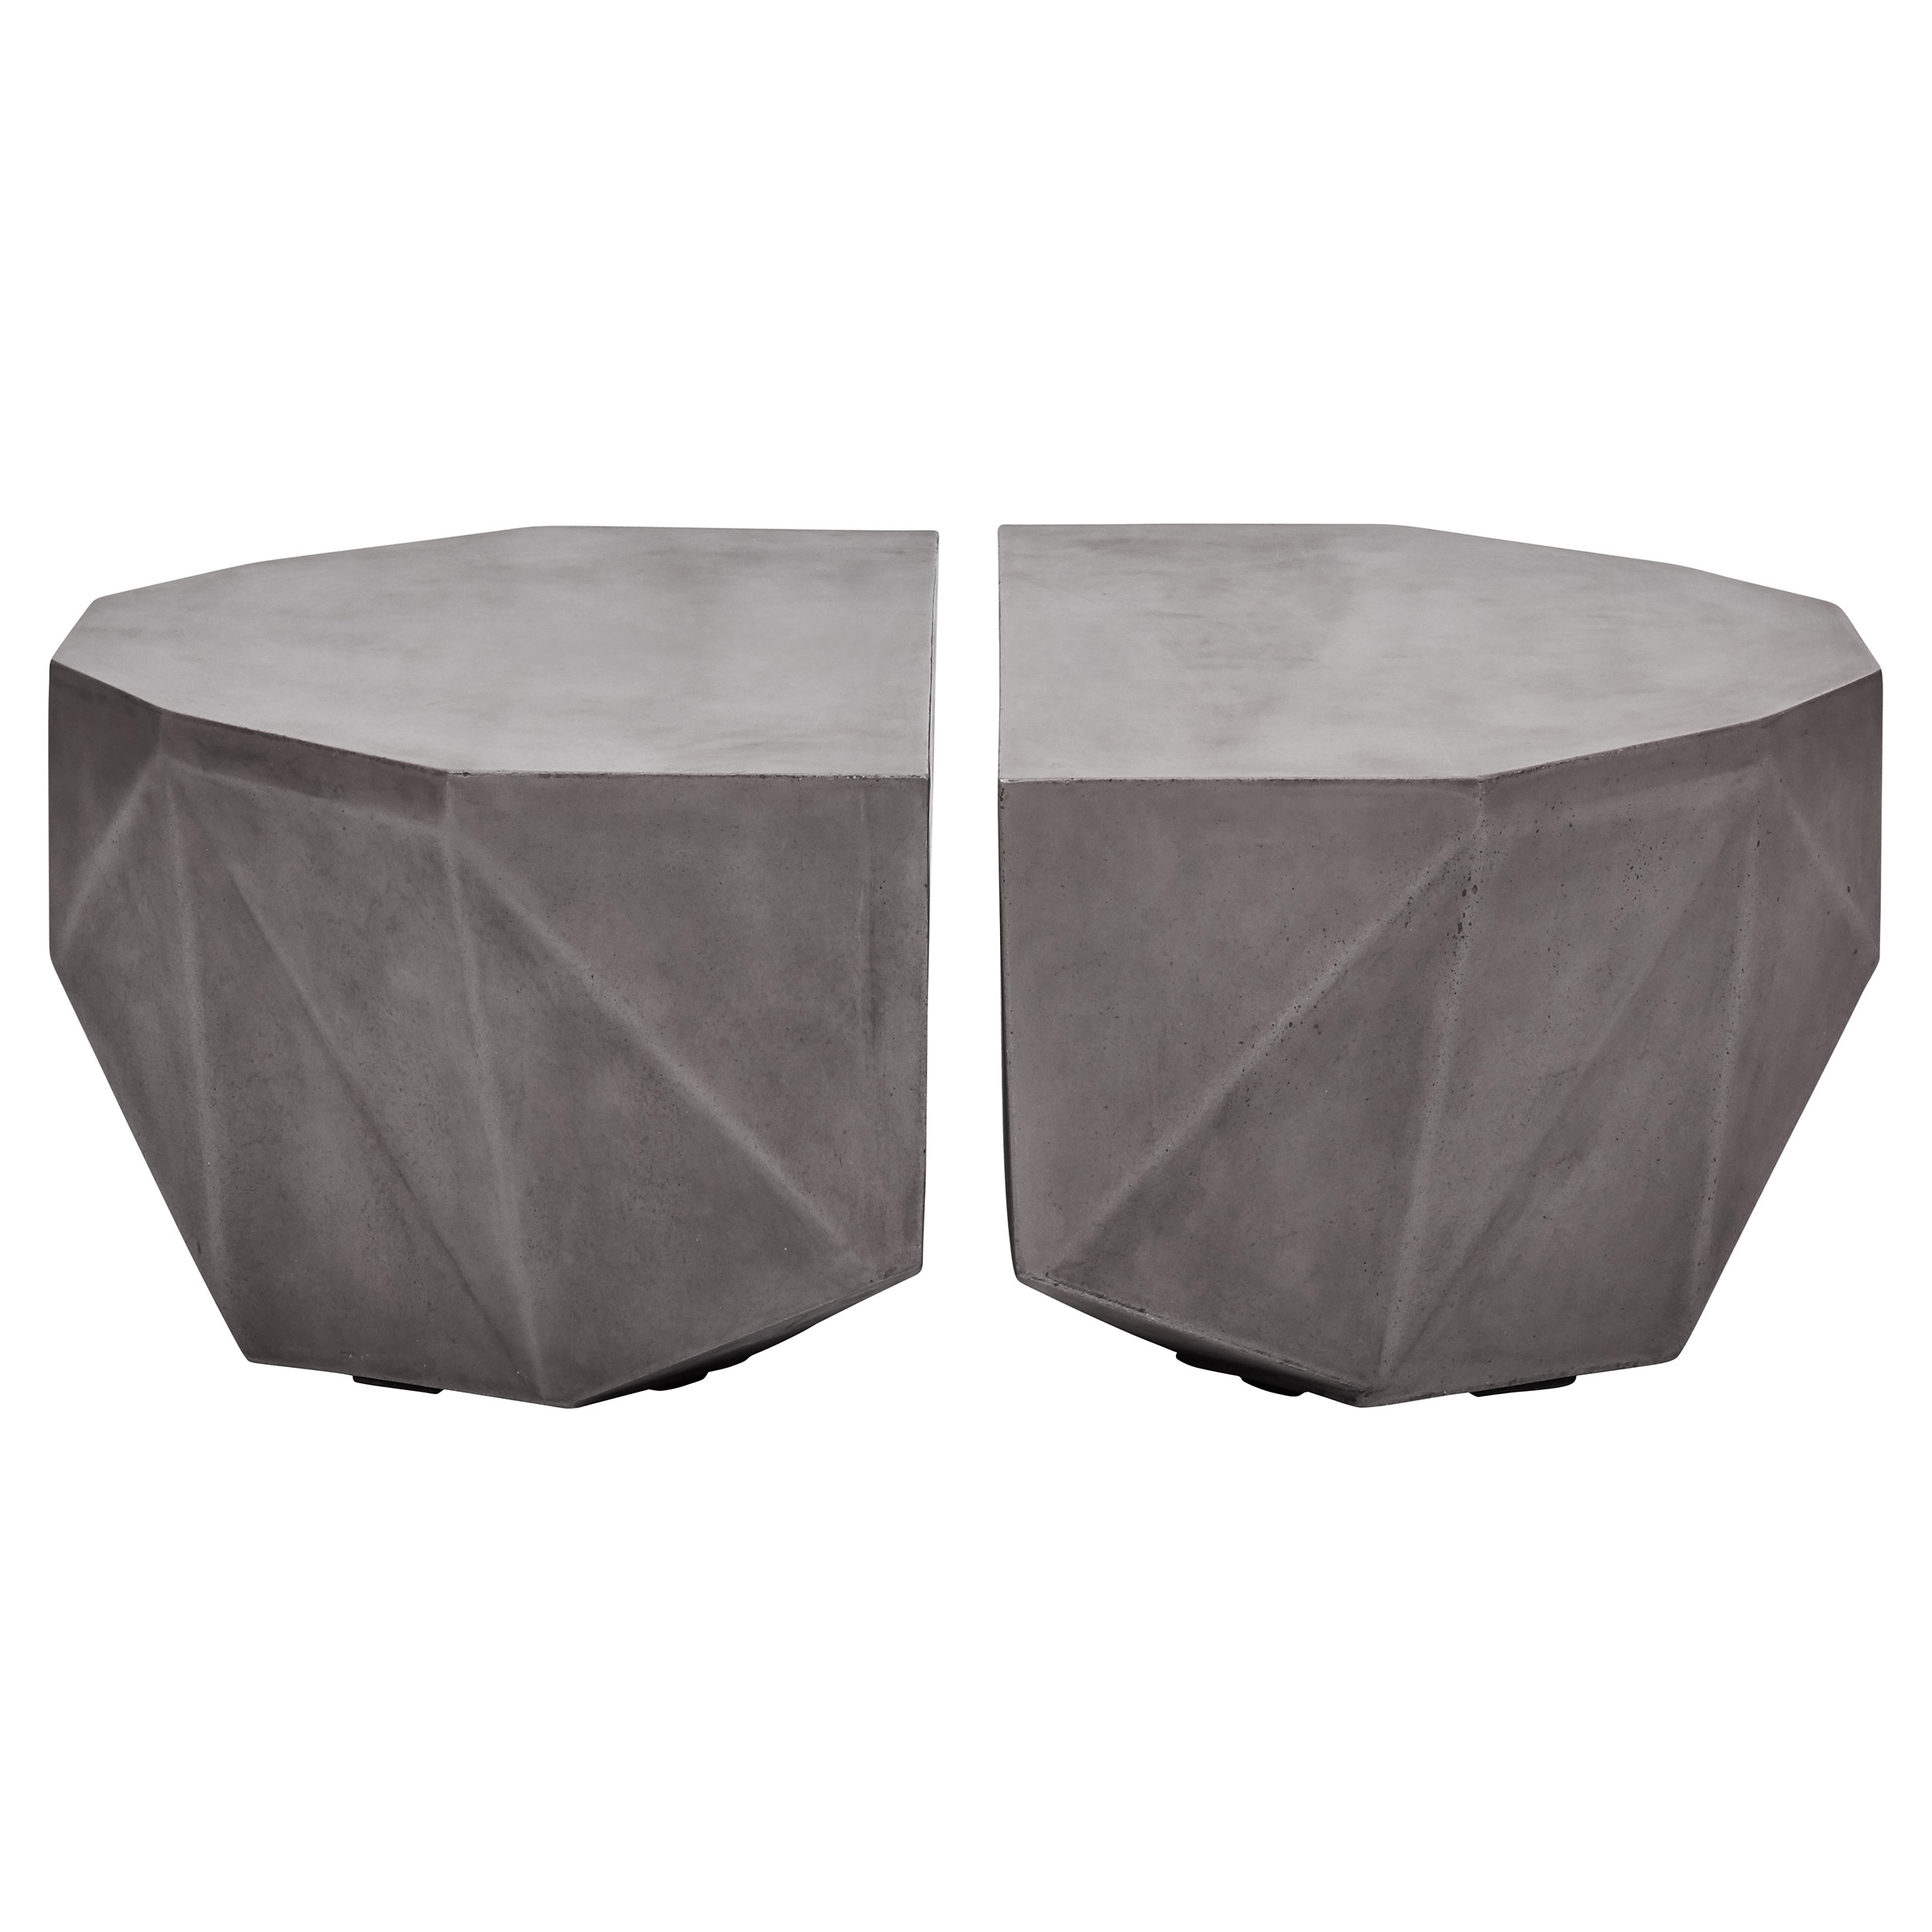 Lily Modern Classic Dark Grey Geometric Outdoor Coffee Table - Set of 2 - Image 2